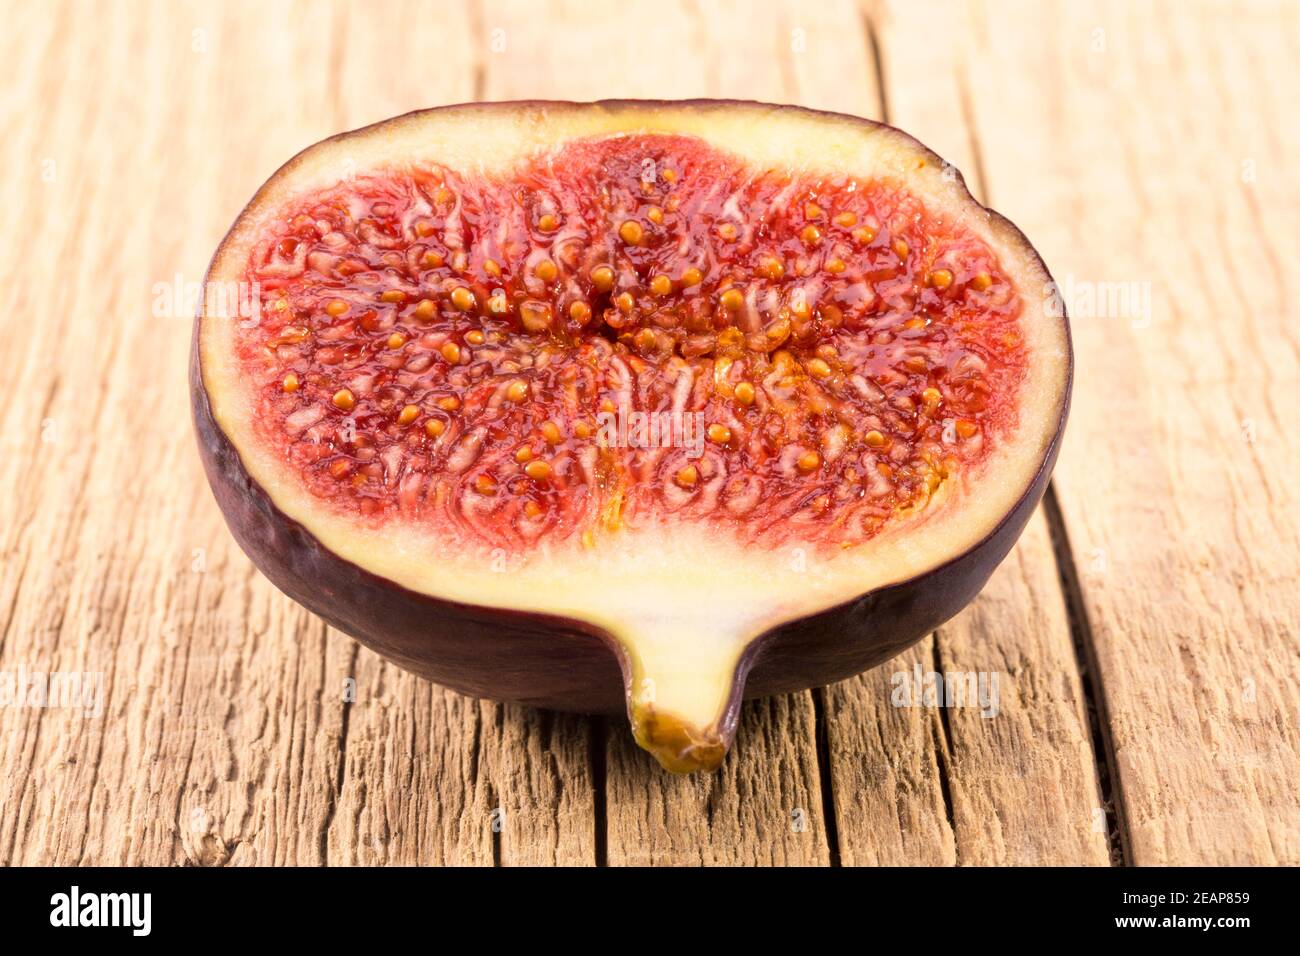 Half of fresh fig on wooden plank, close up. Food photo Stock Photo